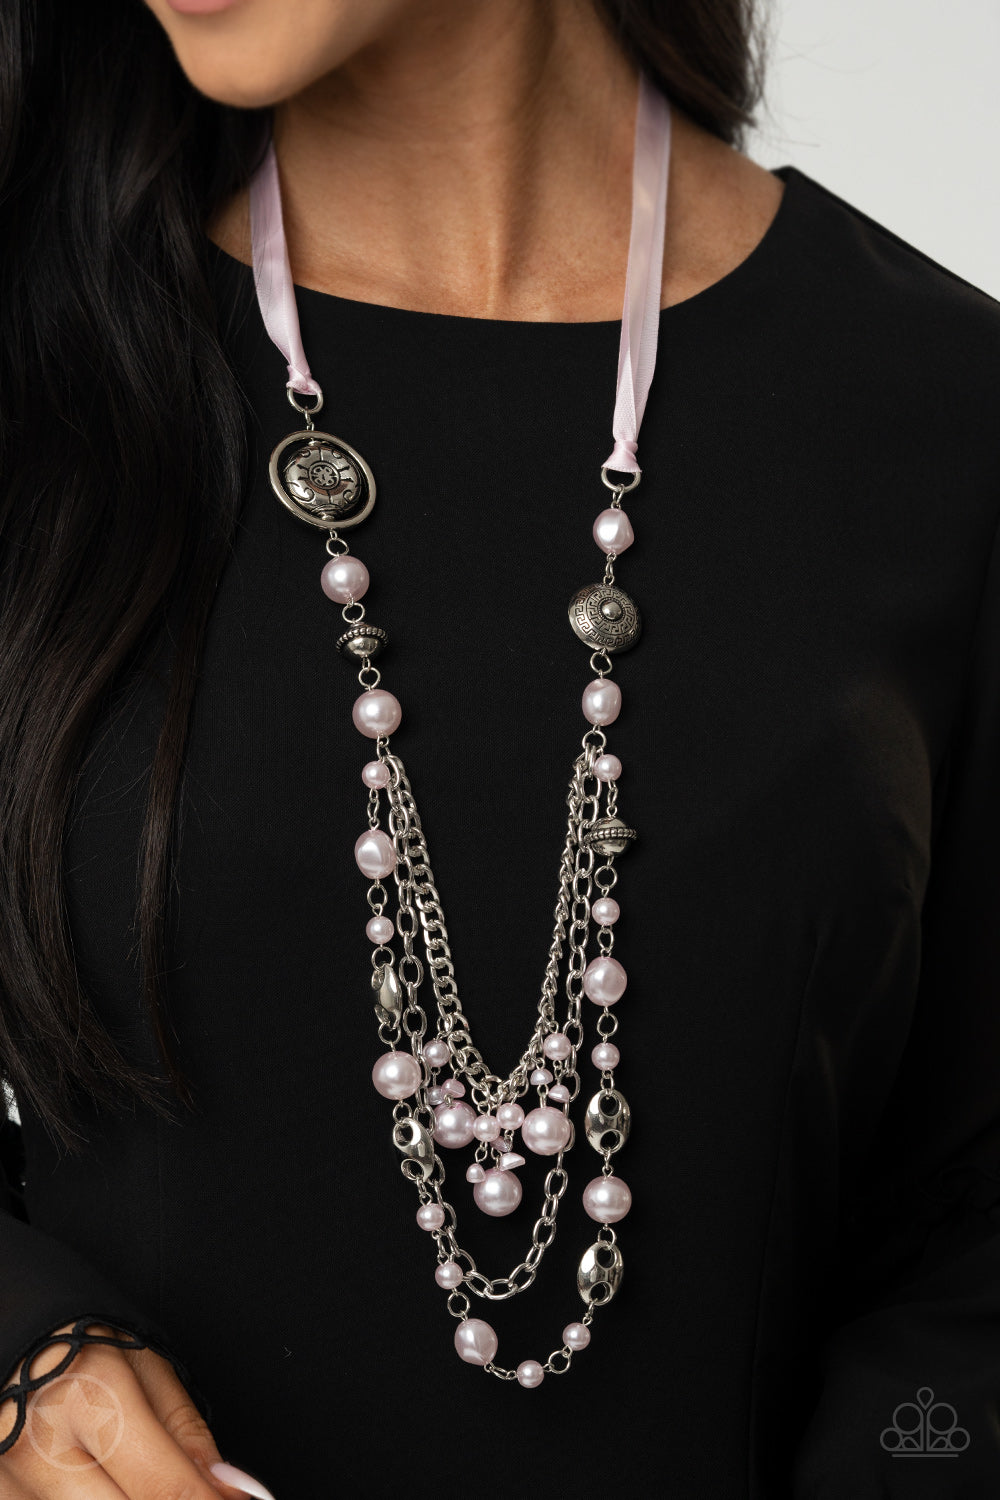 All The Trimmings Pink Paparazzi Necklace Cashmere Pink Jewels